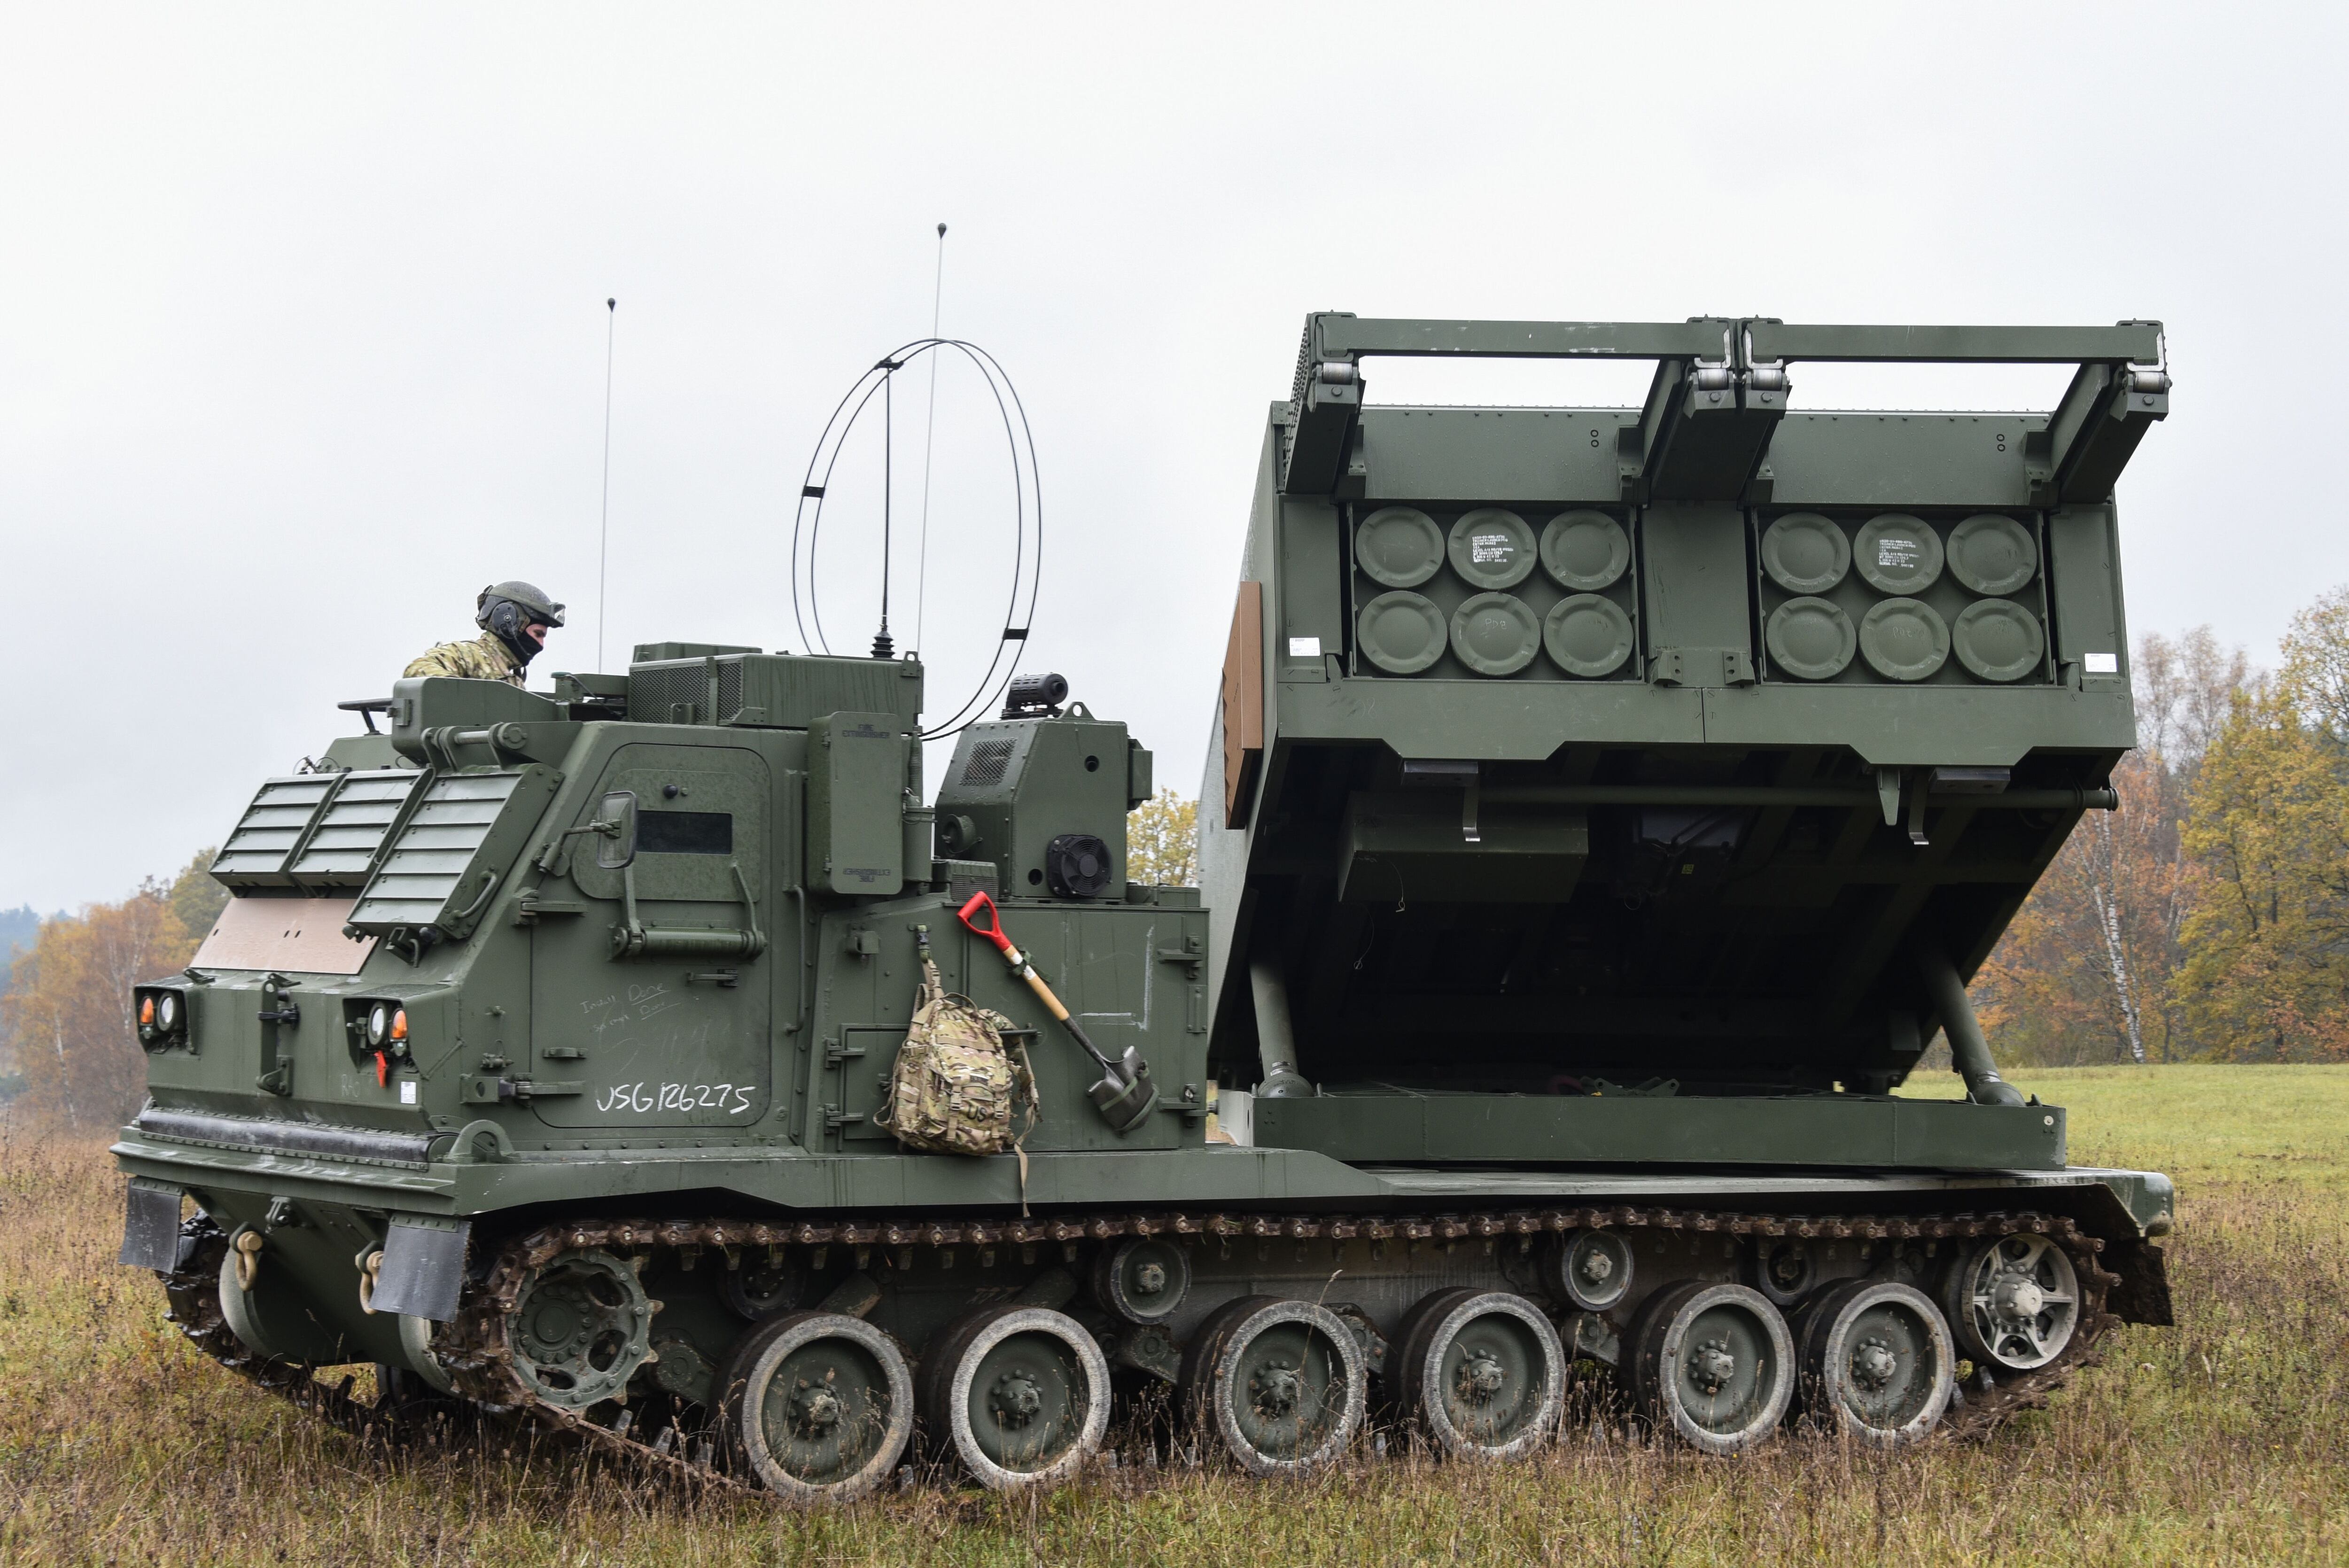 An M270 multiple launch rocket system during Operation Centaur Forge at Grafenwoehr Training Area, Germany, Nov. 6, 2019. (U.S. Army photo by Markus Rauchenberger)